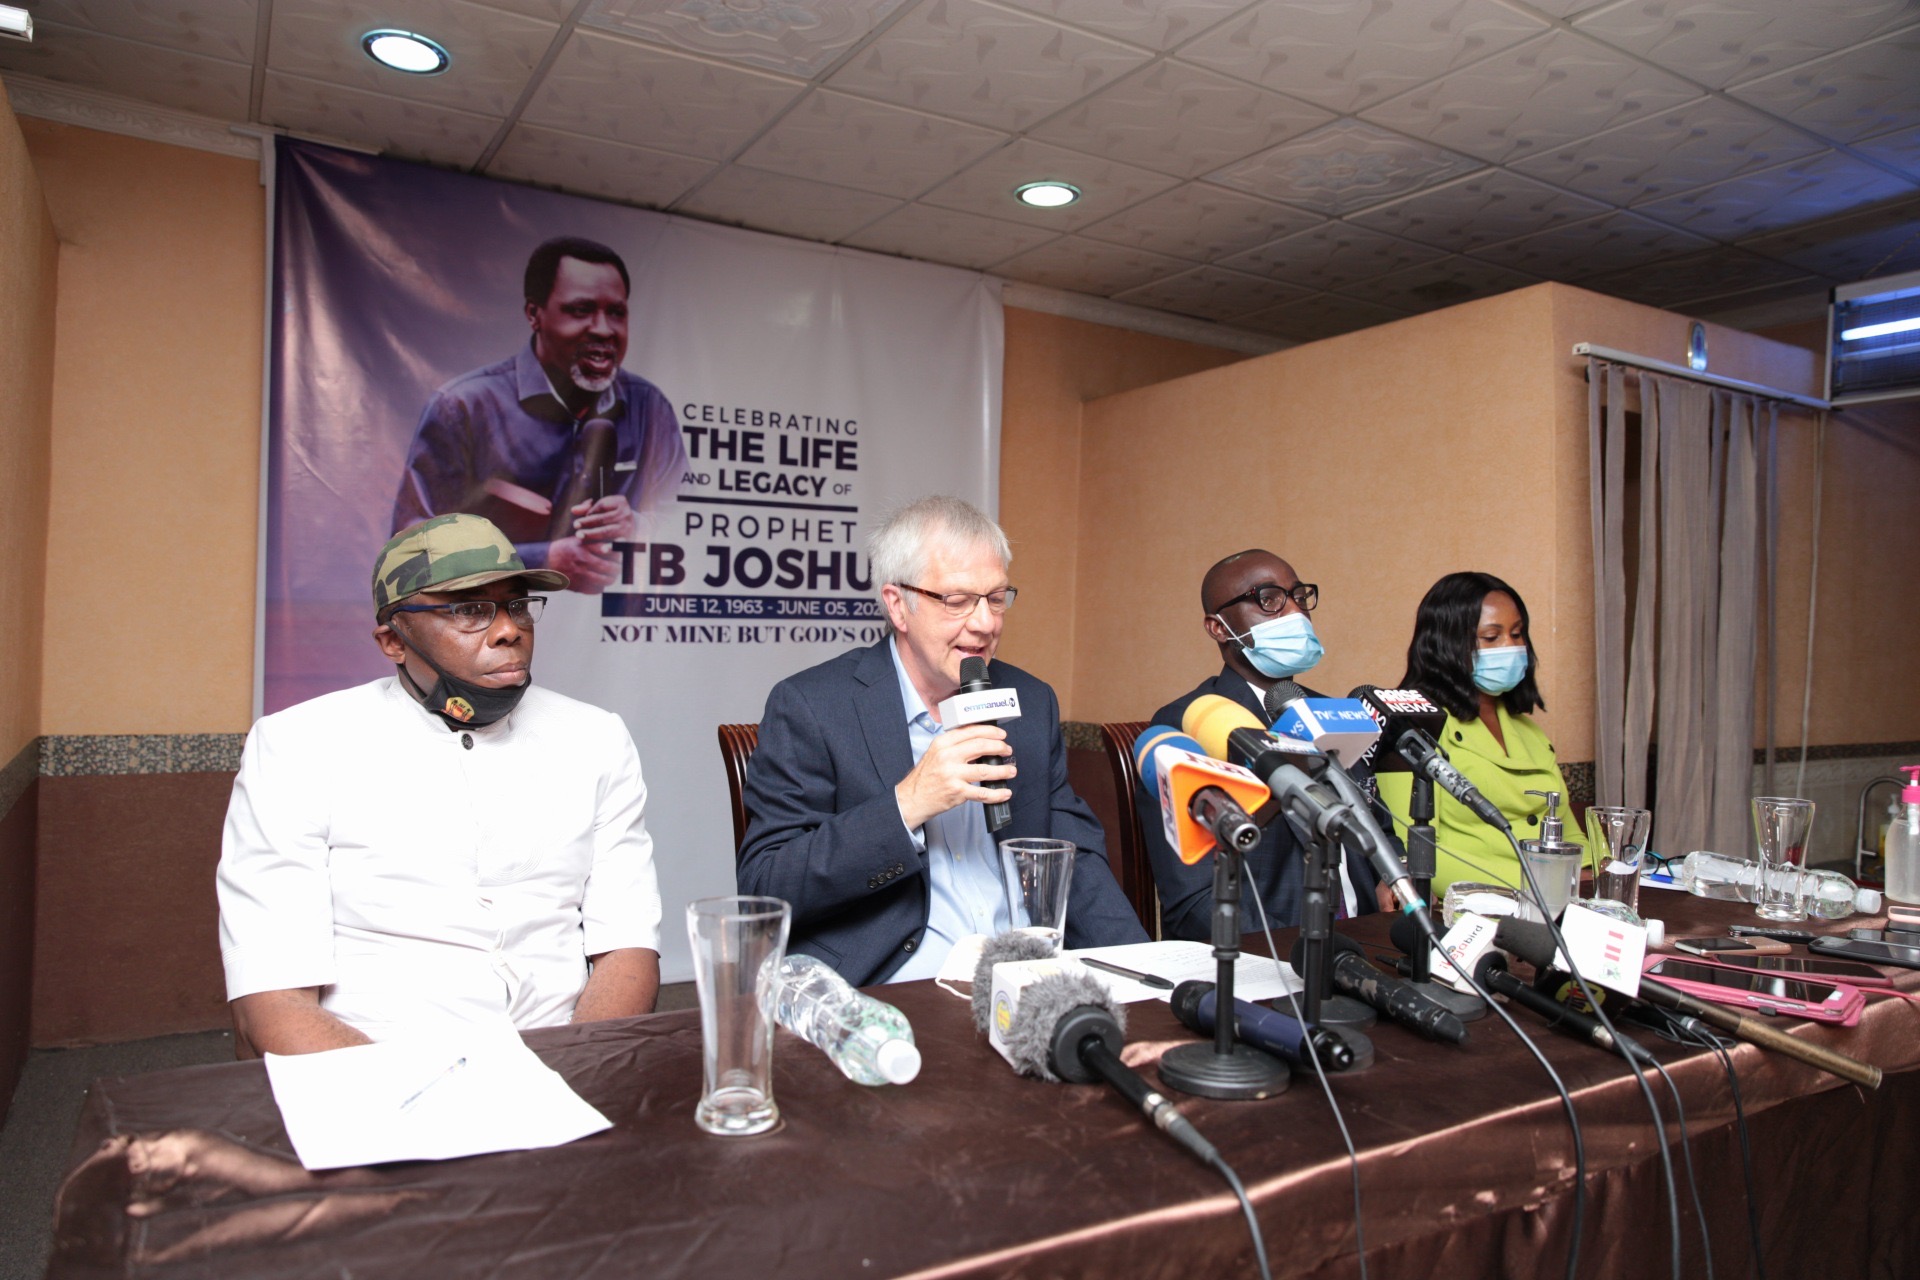 Colonel Andy Aniboh, Dr Gary Tonge Freng, Ayodeji Olabiwonnu and Dr Ugochi Aluka at a press conference organized by Synagogue Church Of All Nations – Photo by Ayodele Efunla